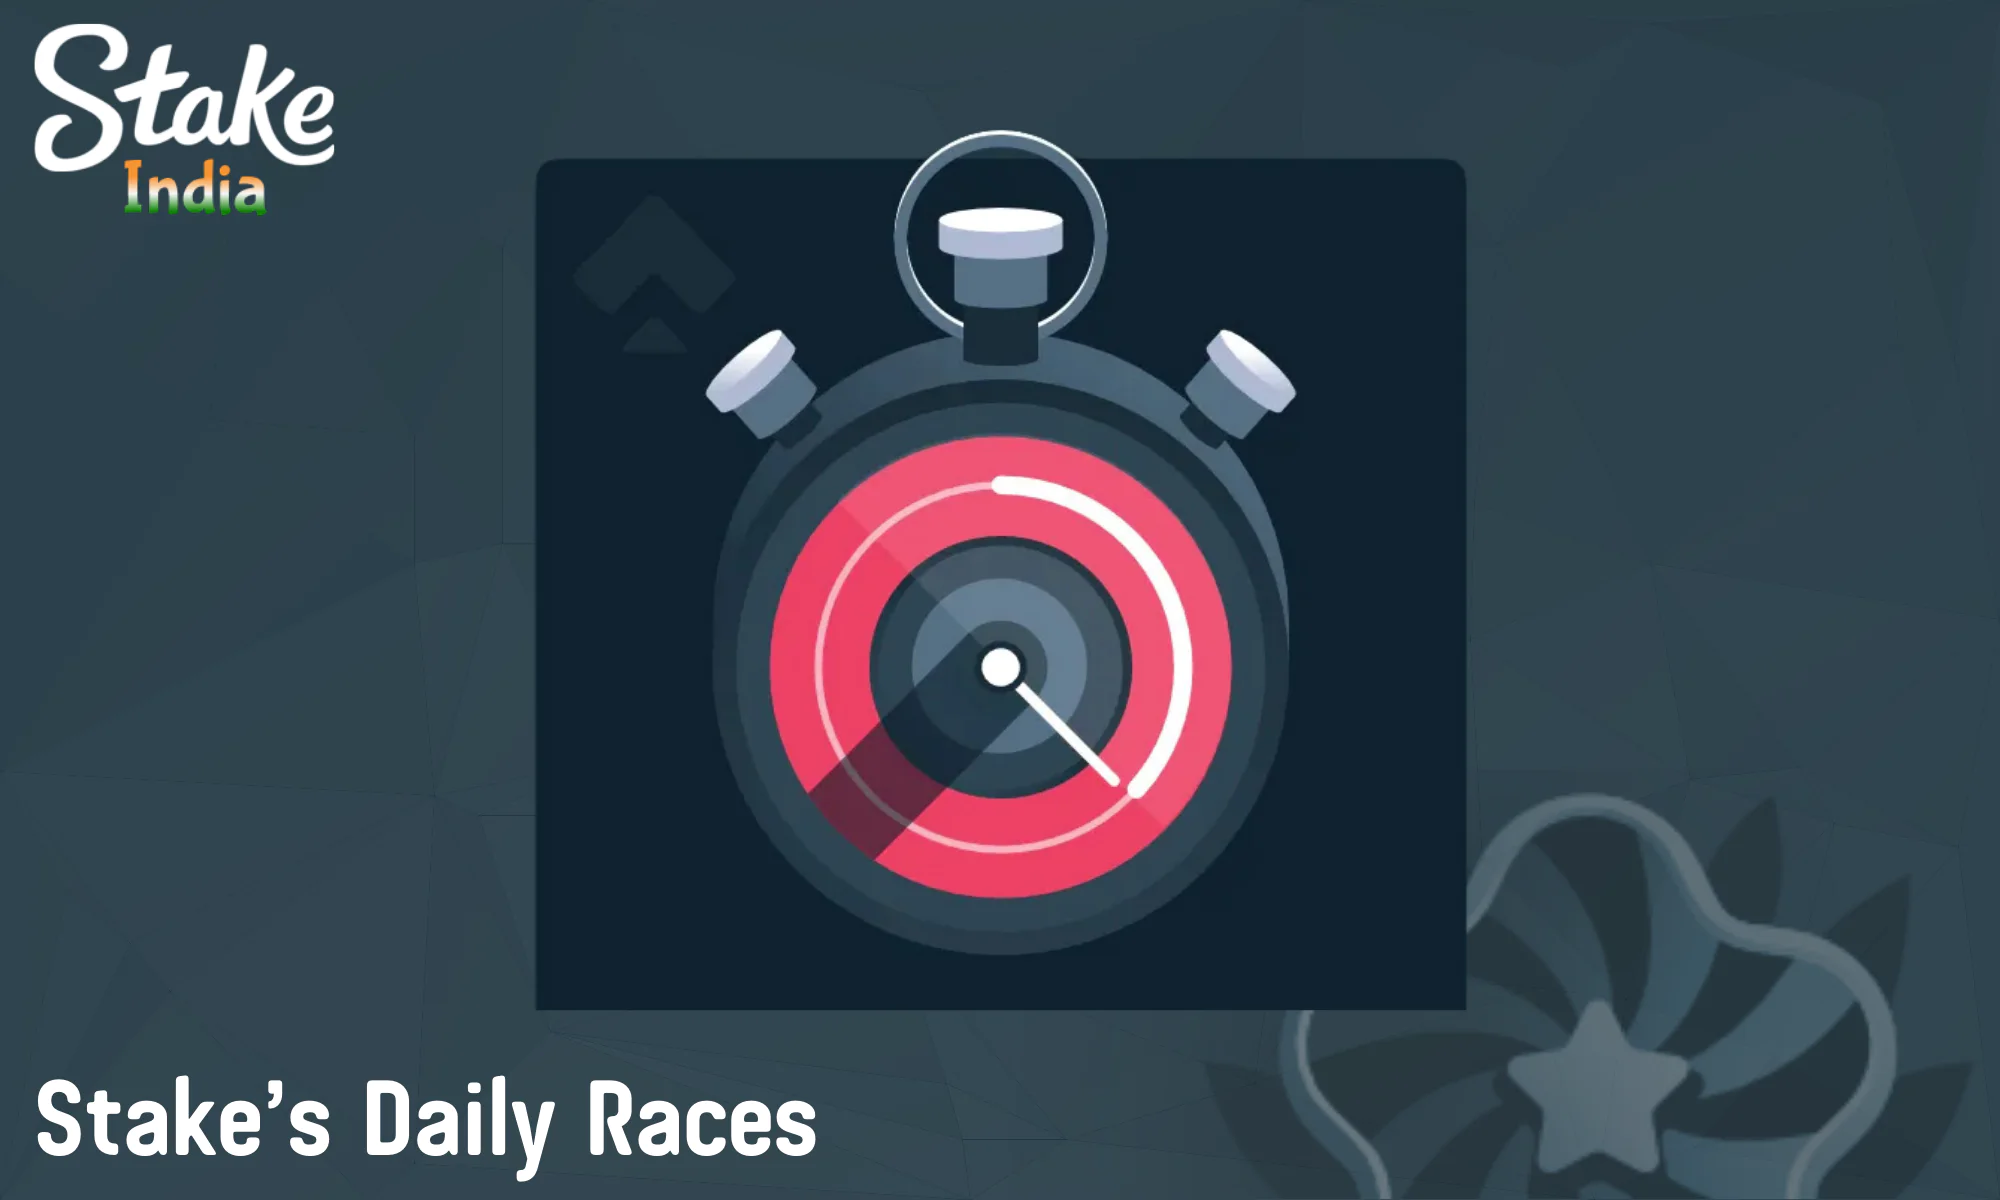 Stake holds daily races with a big cash prize